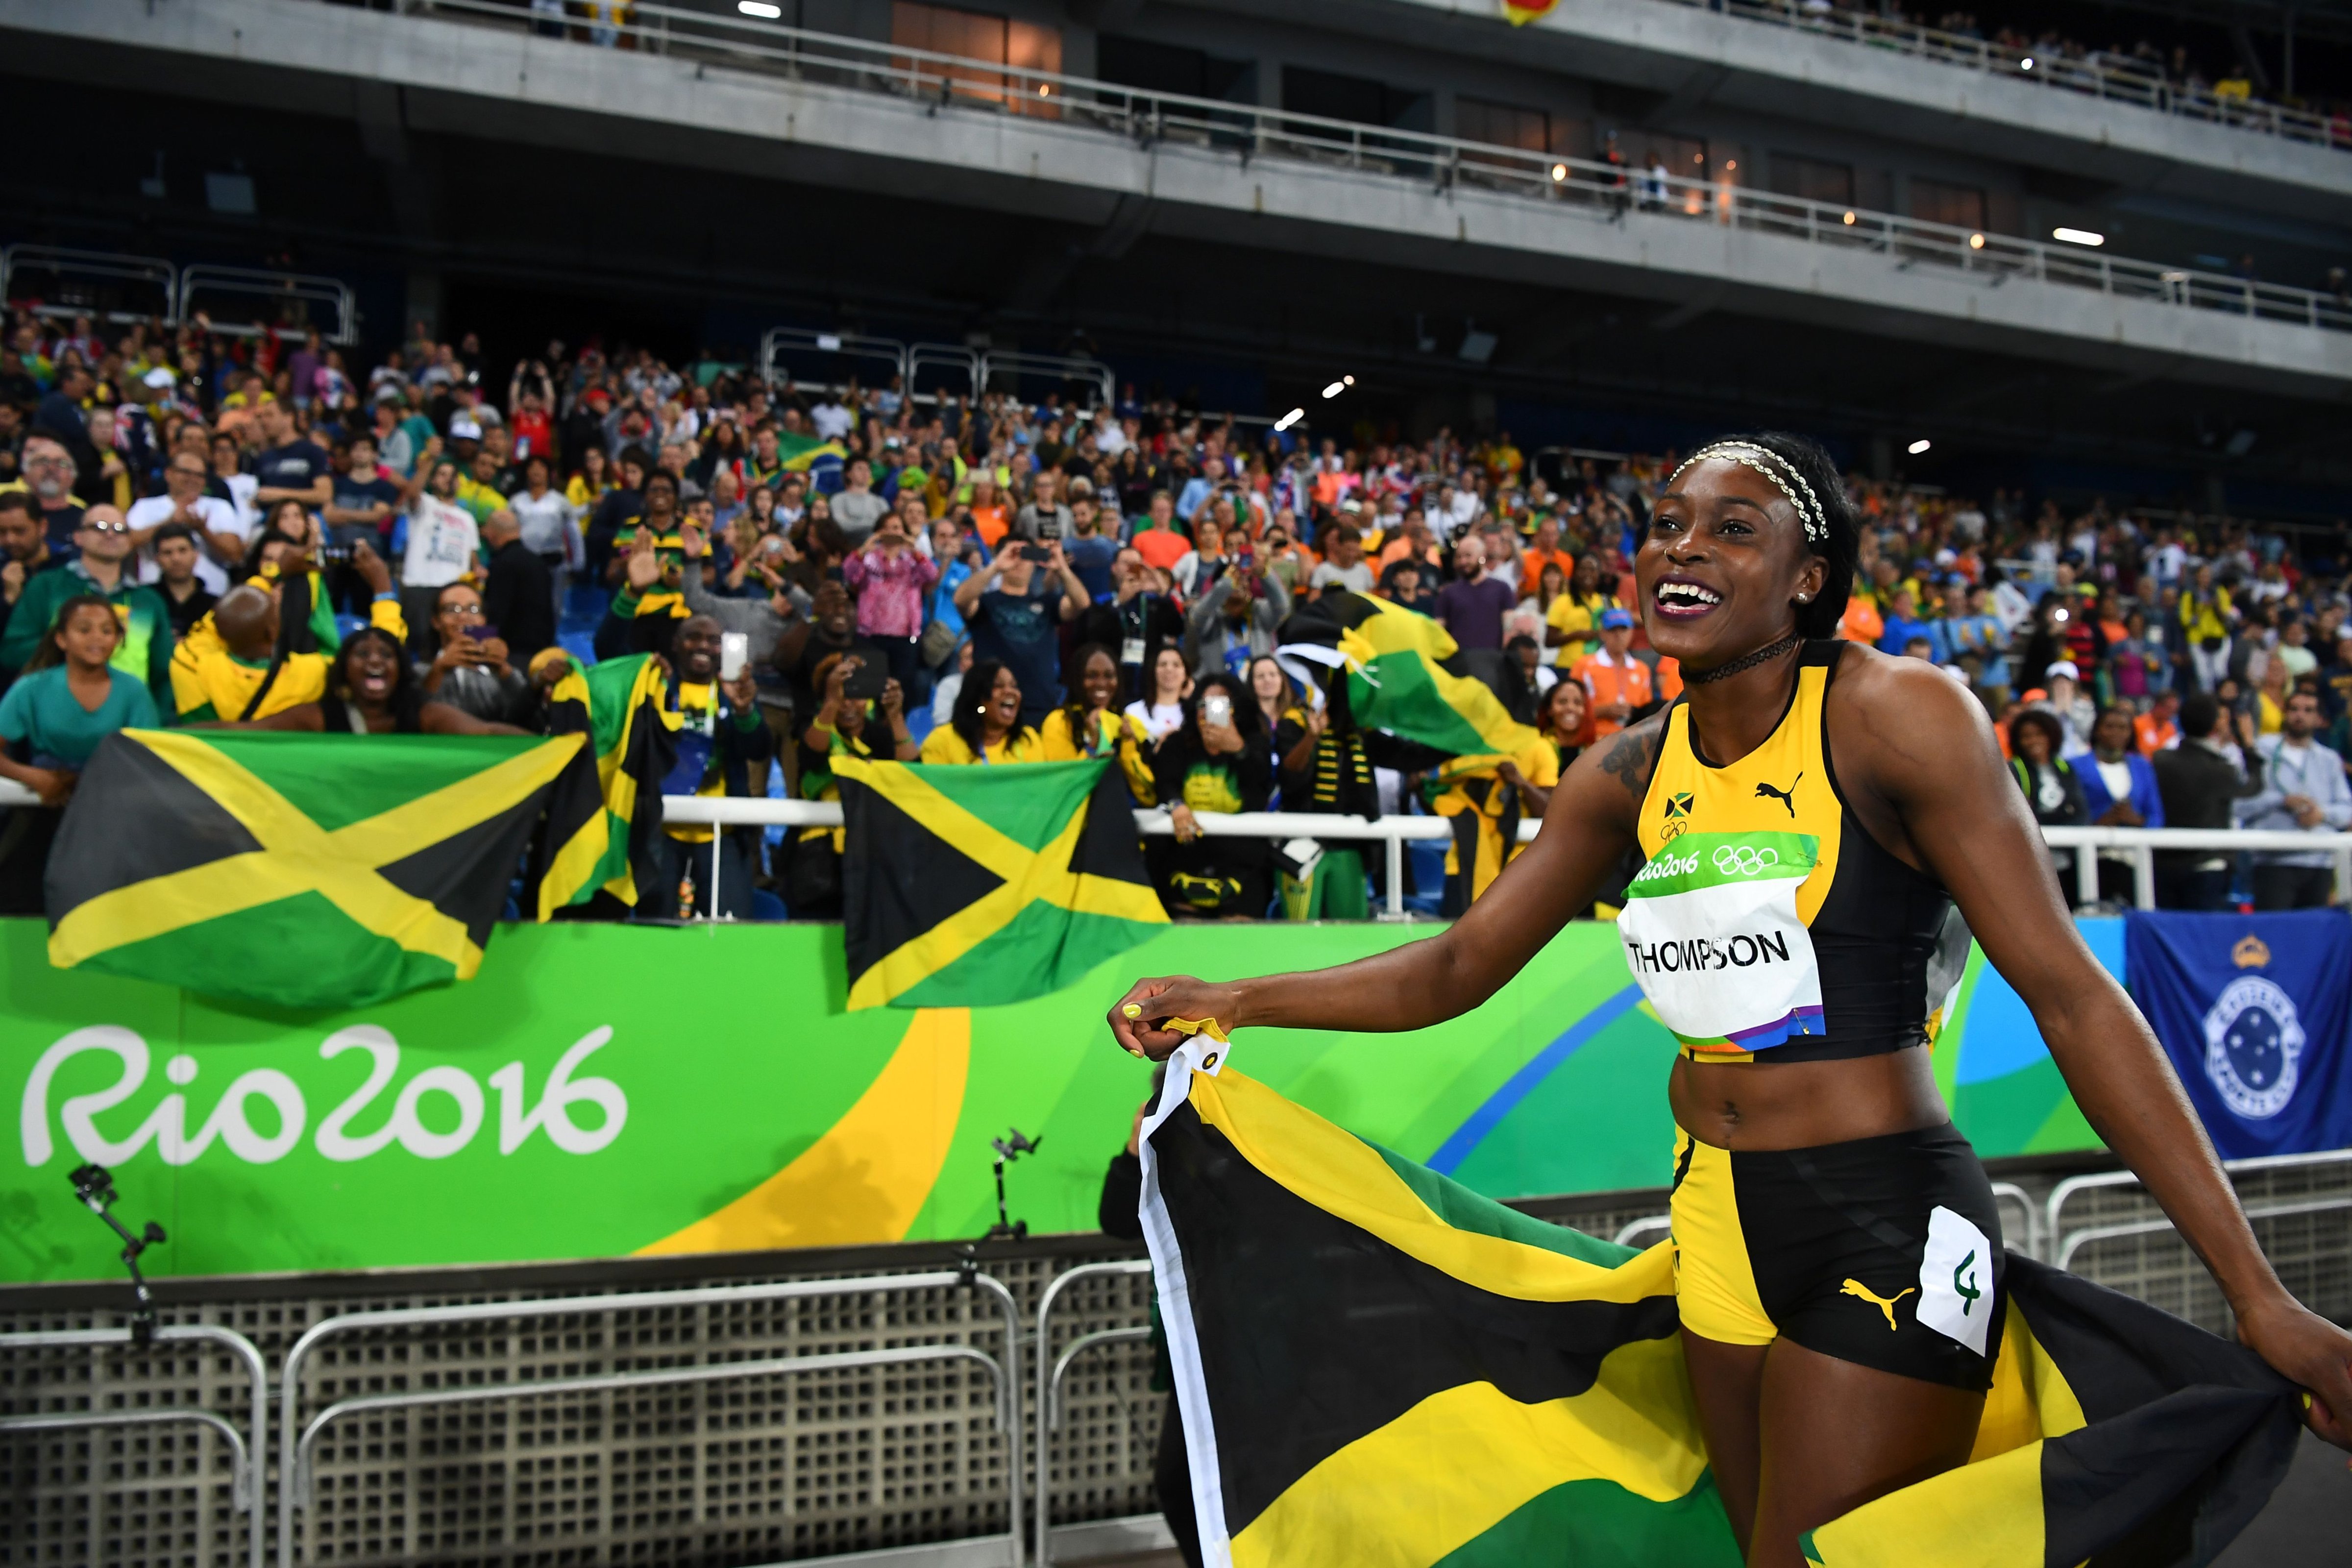 Jamaica's Elaine Thompson celebrates after she won the Women's 100m Final during the athletics event at the Rio 2016 Olympic Games at the Olympic Stadium in Rio de Janeiro on August 13, 2016. (Franck Fife—AFP—Getty Images)